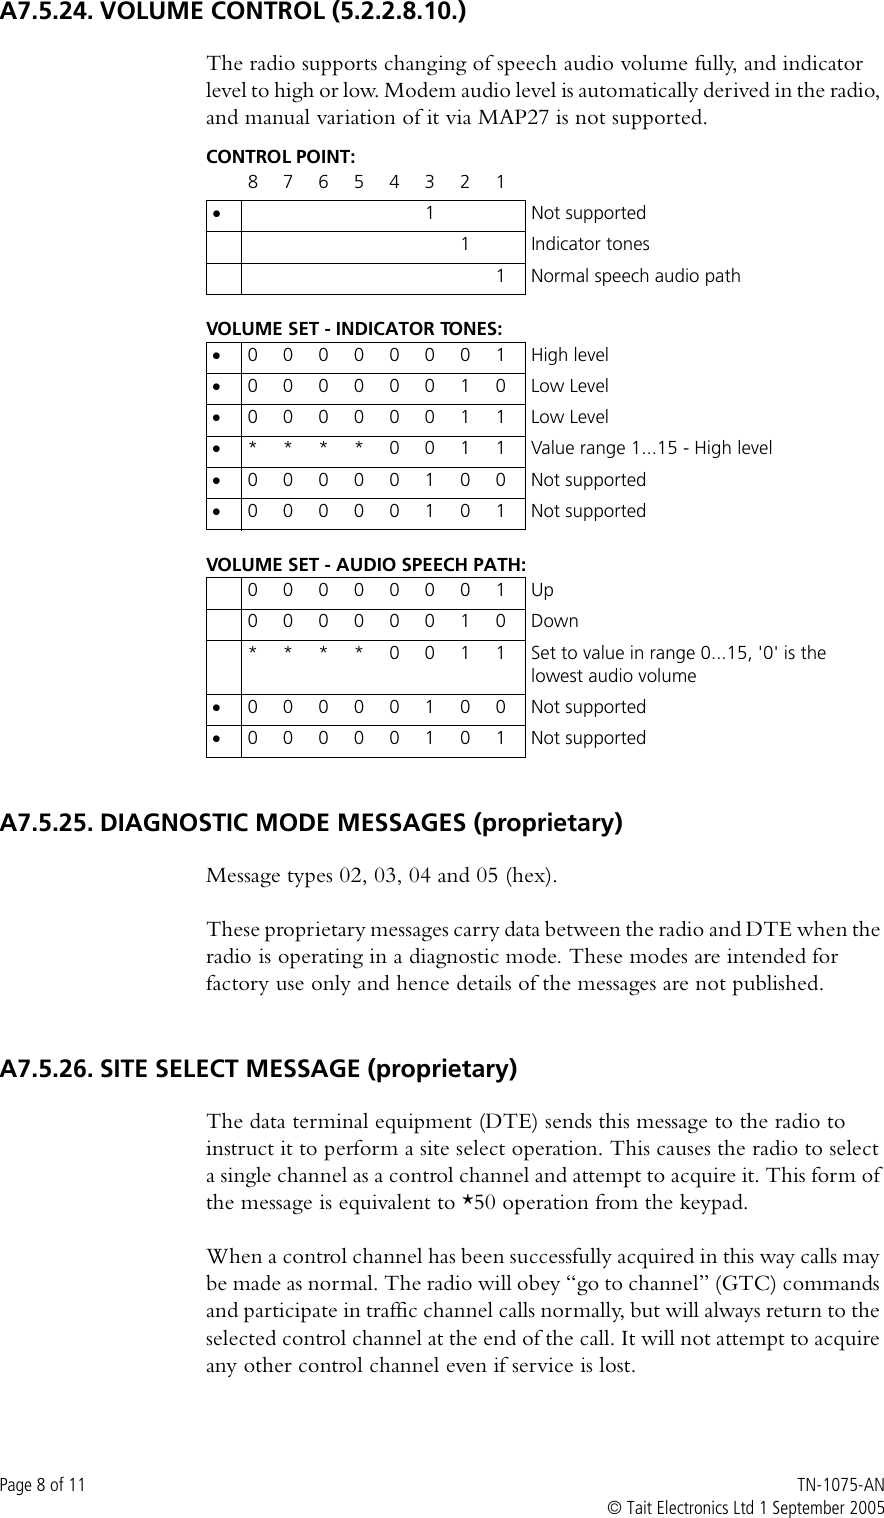 Page 8 of 11 - MAP27 Implementation Form TECHNOTE/TM8000/TN-1075-AN_TM8200 TN-1075-AN TM8200